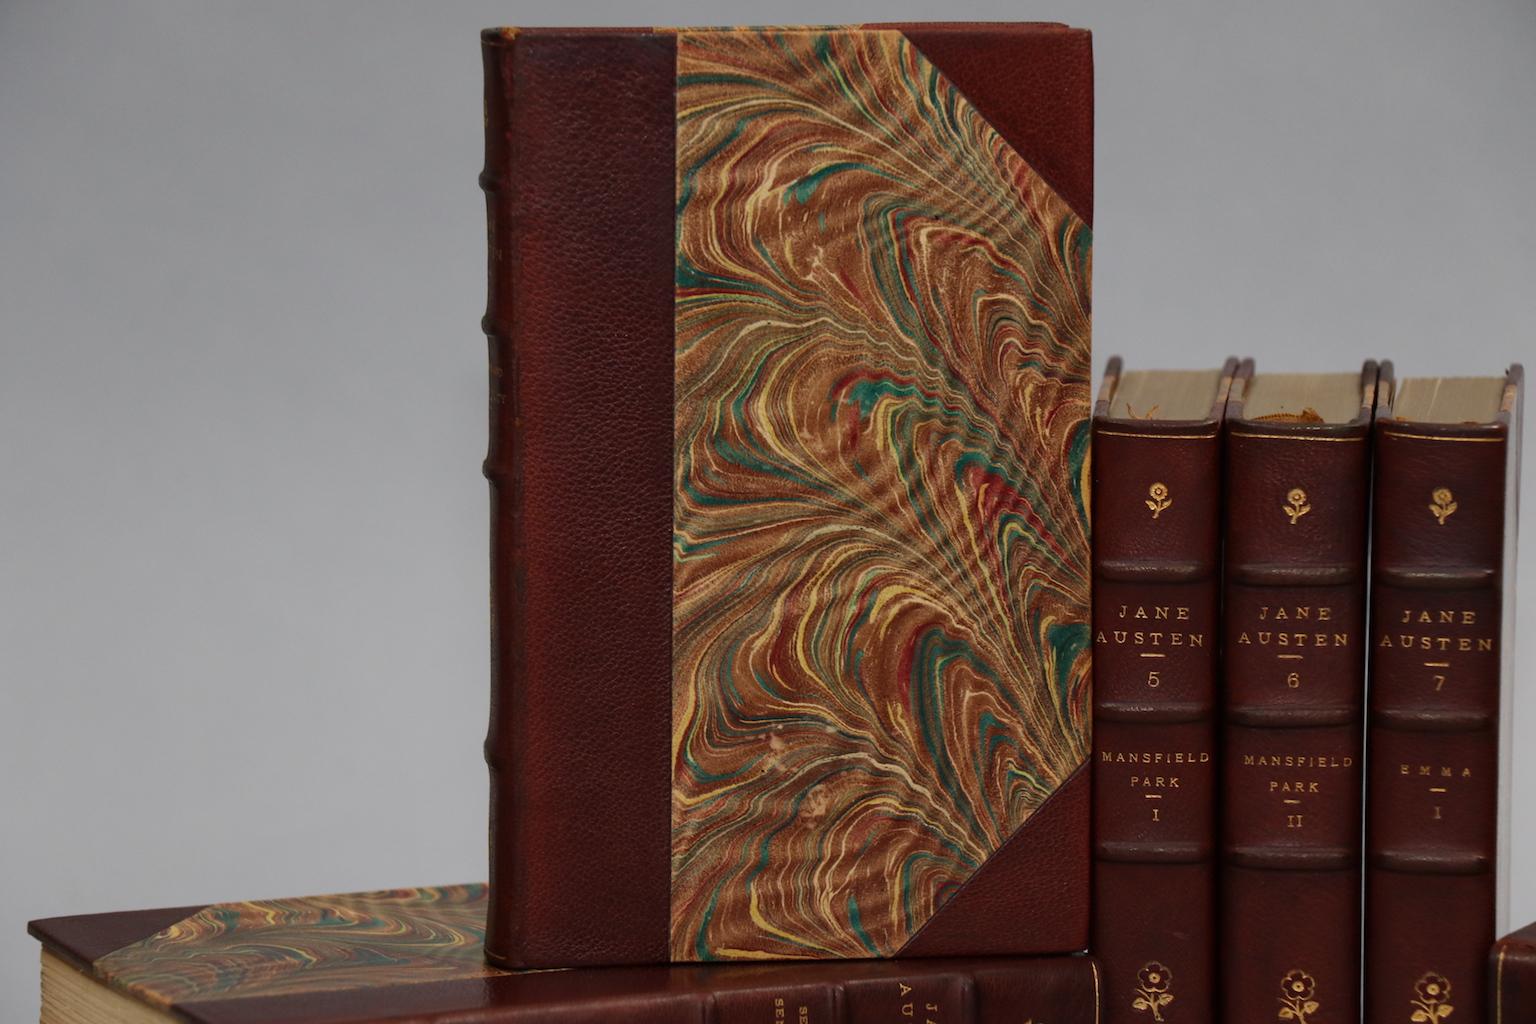 Winchester Edition. Leatherbound. Ten volumes. Small octavo. Limited to 250 copies, this is #114. Bound in three quarter brown morocco, marbled boards, top edges gilt, and raised bands & gilt tooling on spines. Illustrated by C.E. & H.M. Brock in